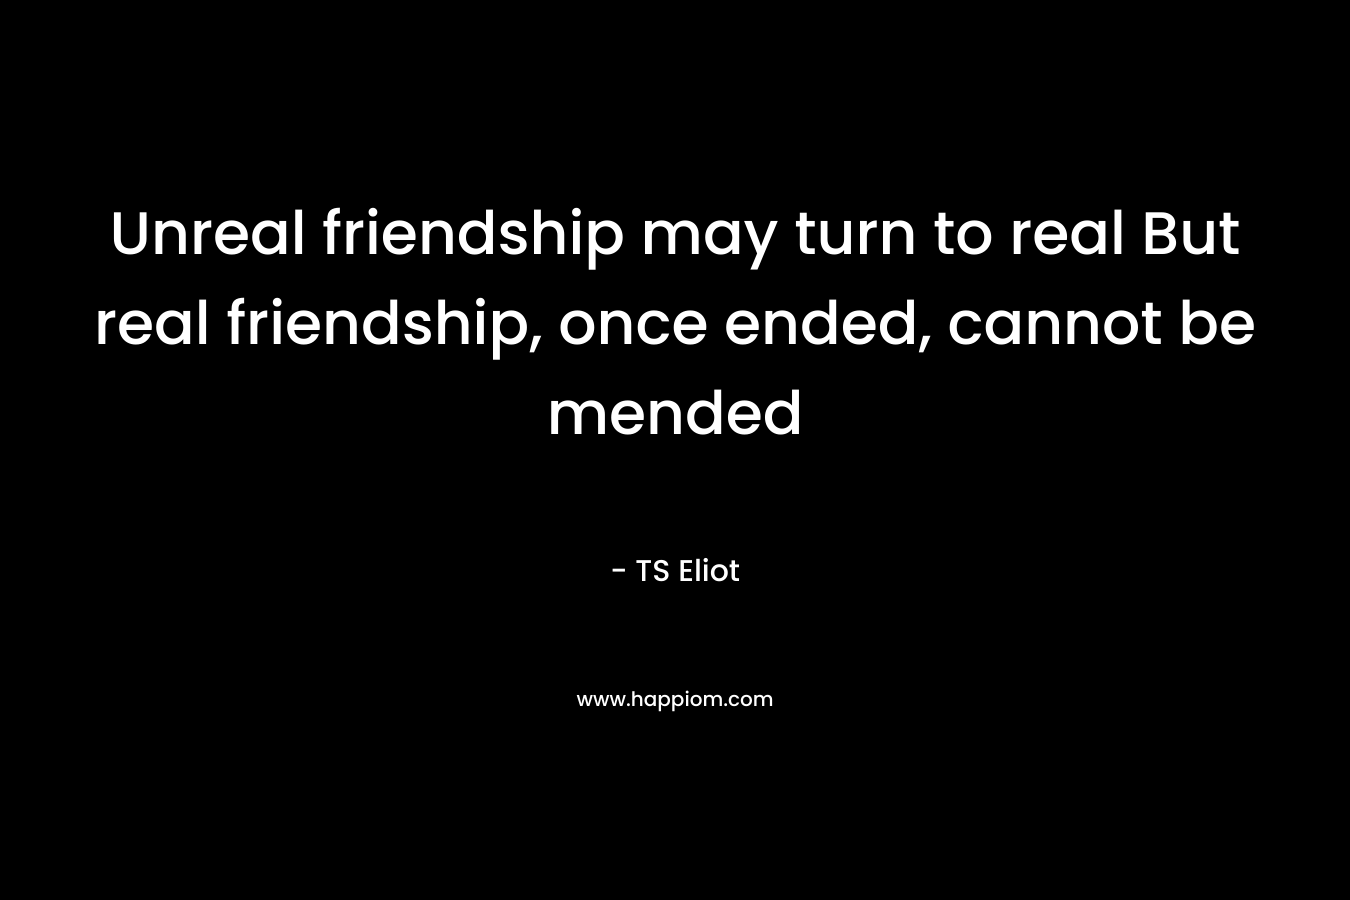 Unreal friendship may turn to real But real friendship, once ended, cannot be mended